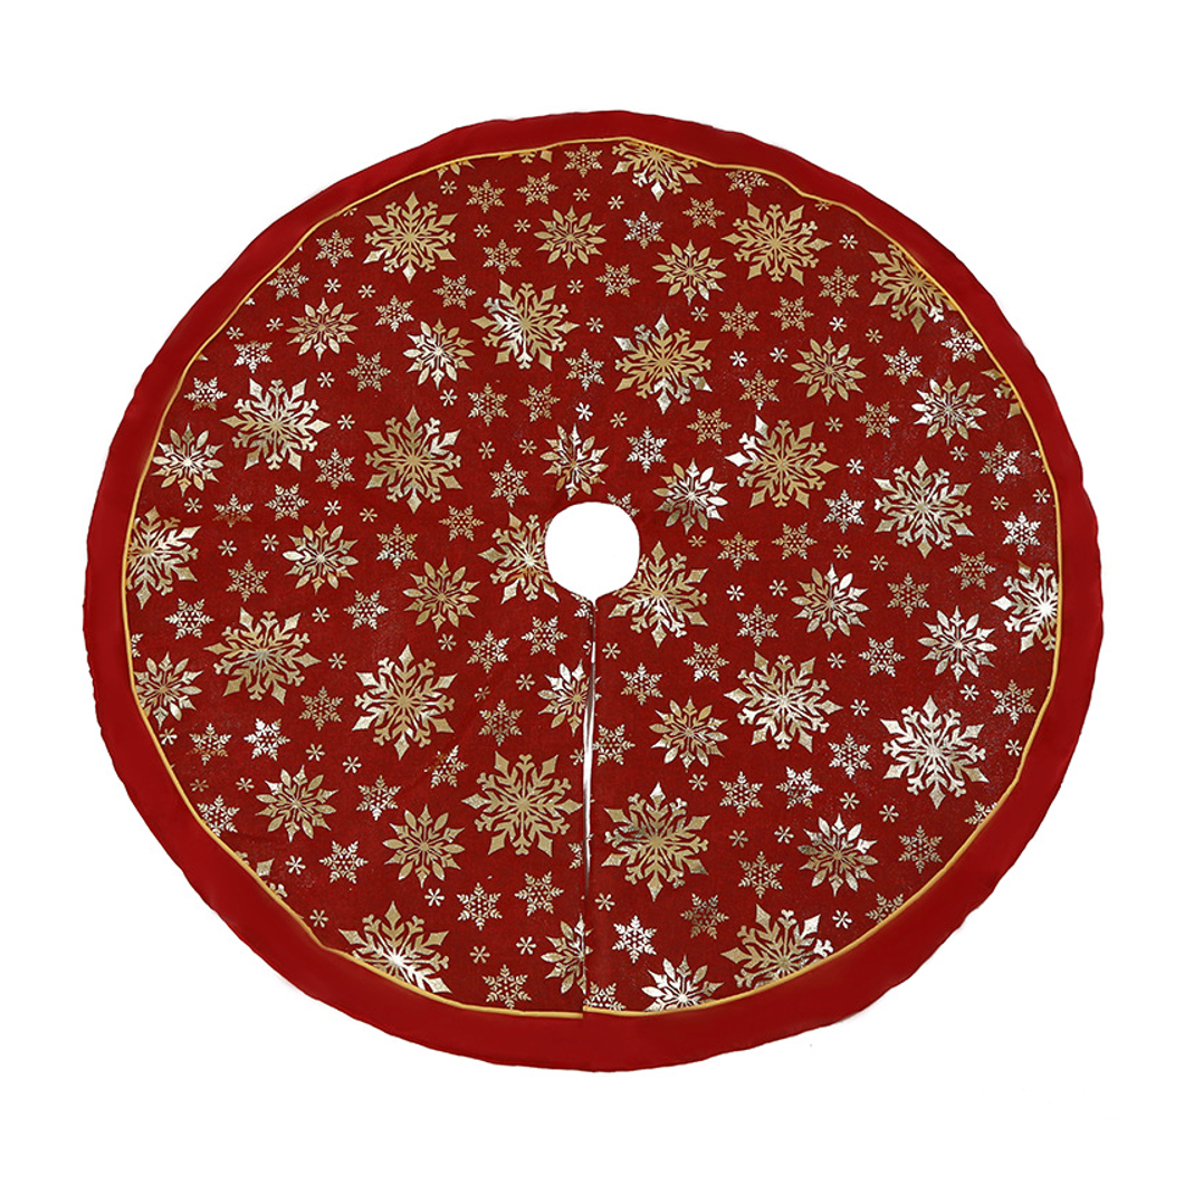 120cm-Stitched-Santa-Christmas-Snowflake-Skir-Tree-Skirt-for-Home-New-Year-2020-Christmas-Fancy-Deco-1770958-2